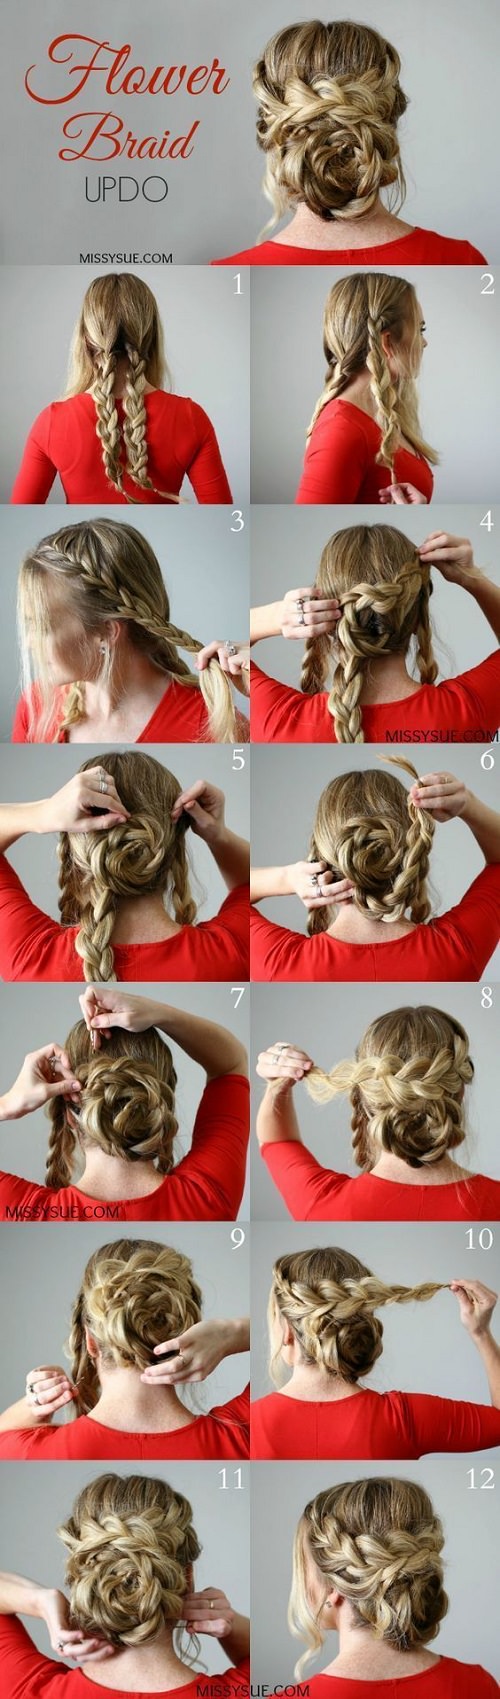 30 Hairstyles for long hair with step by step instructions.